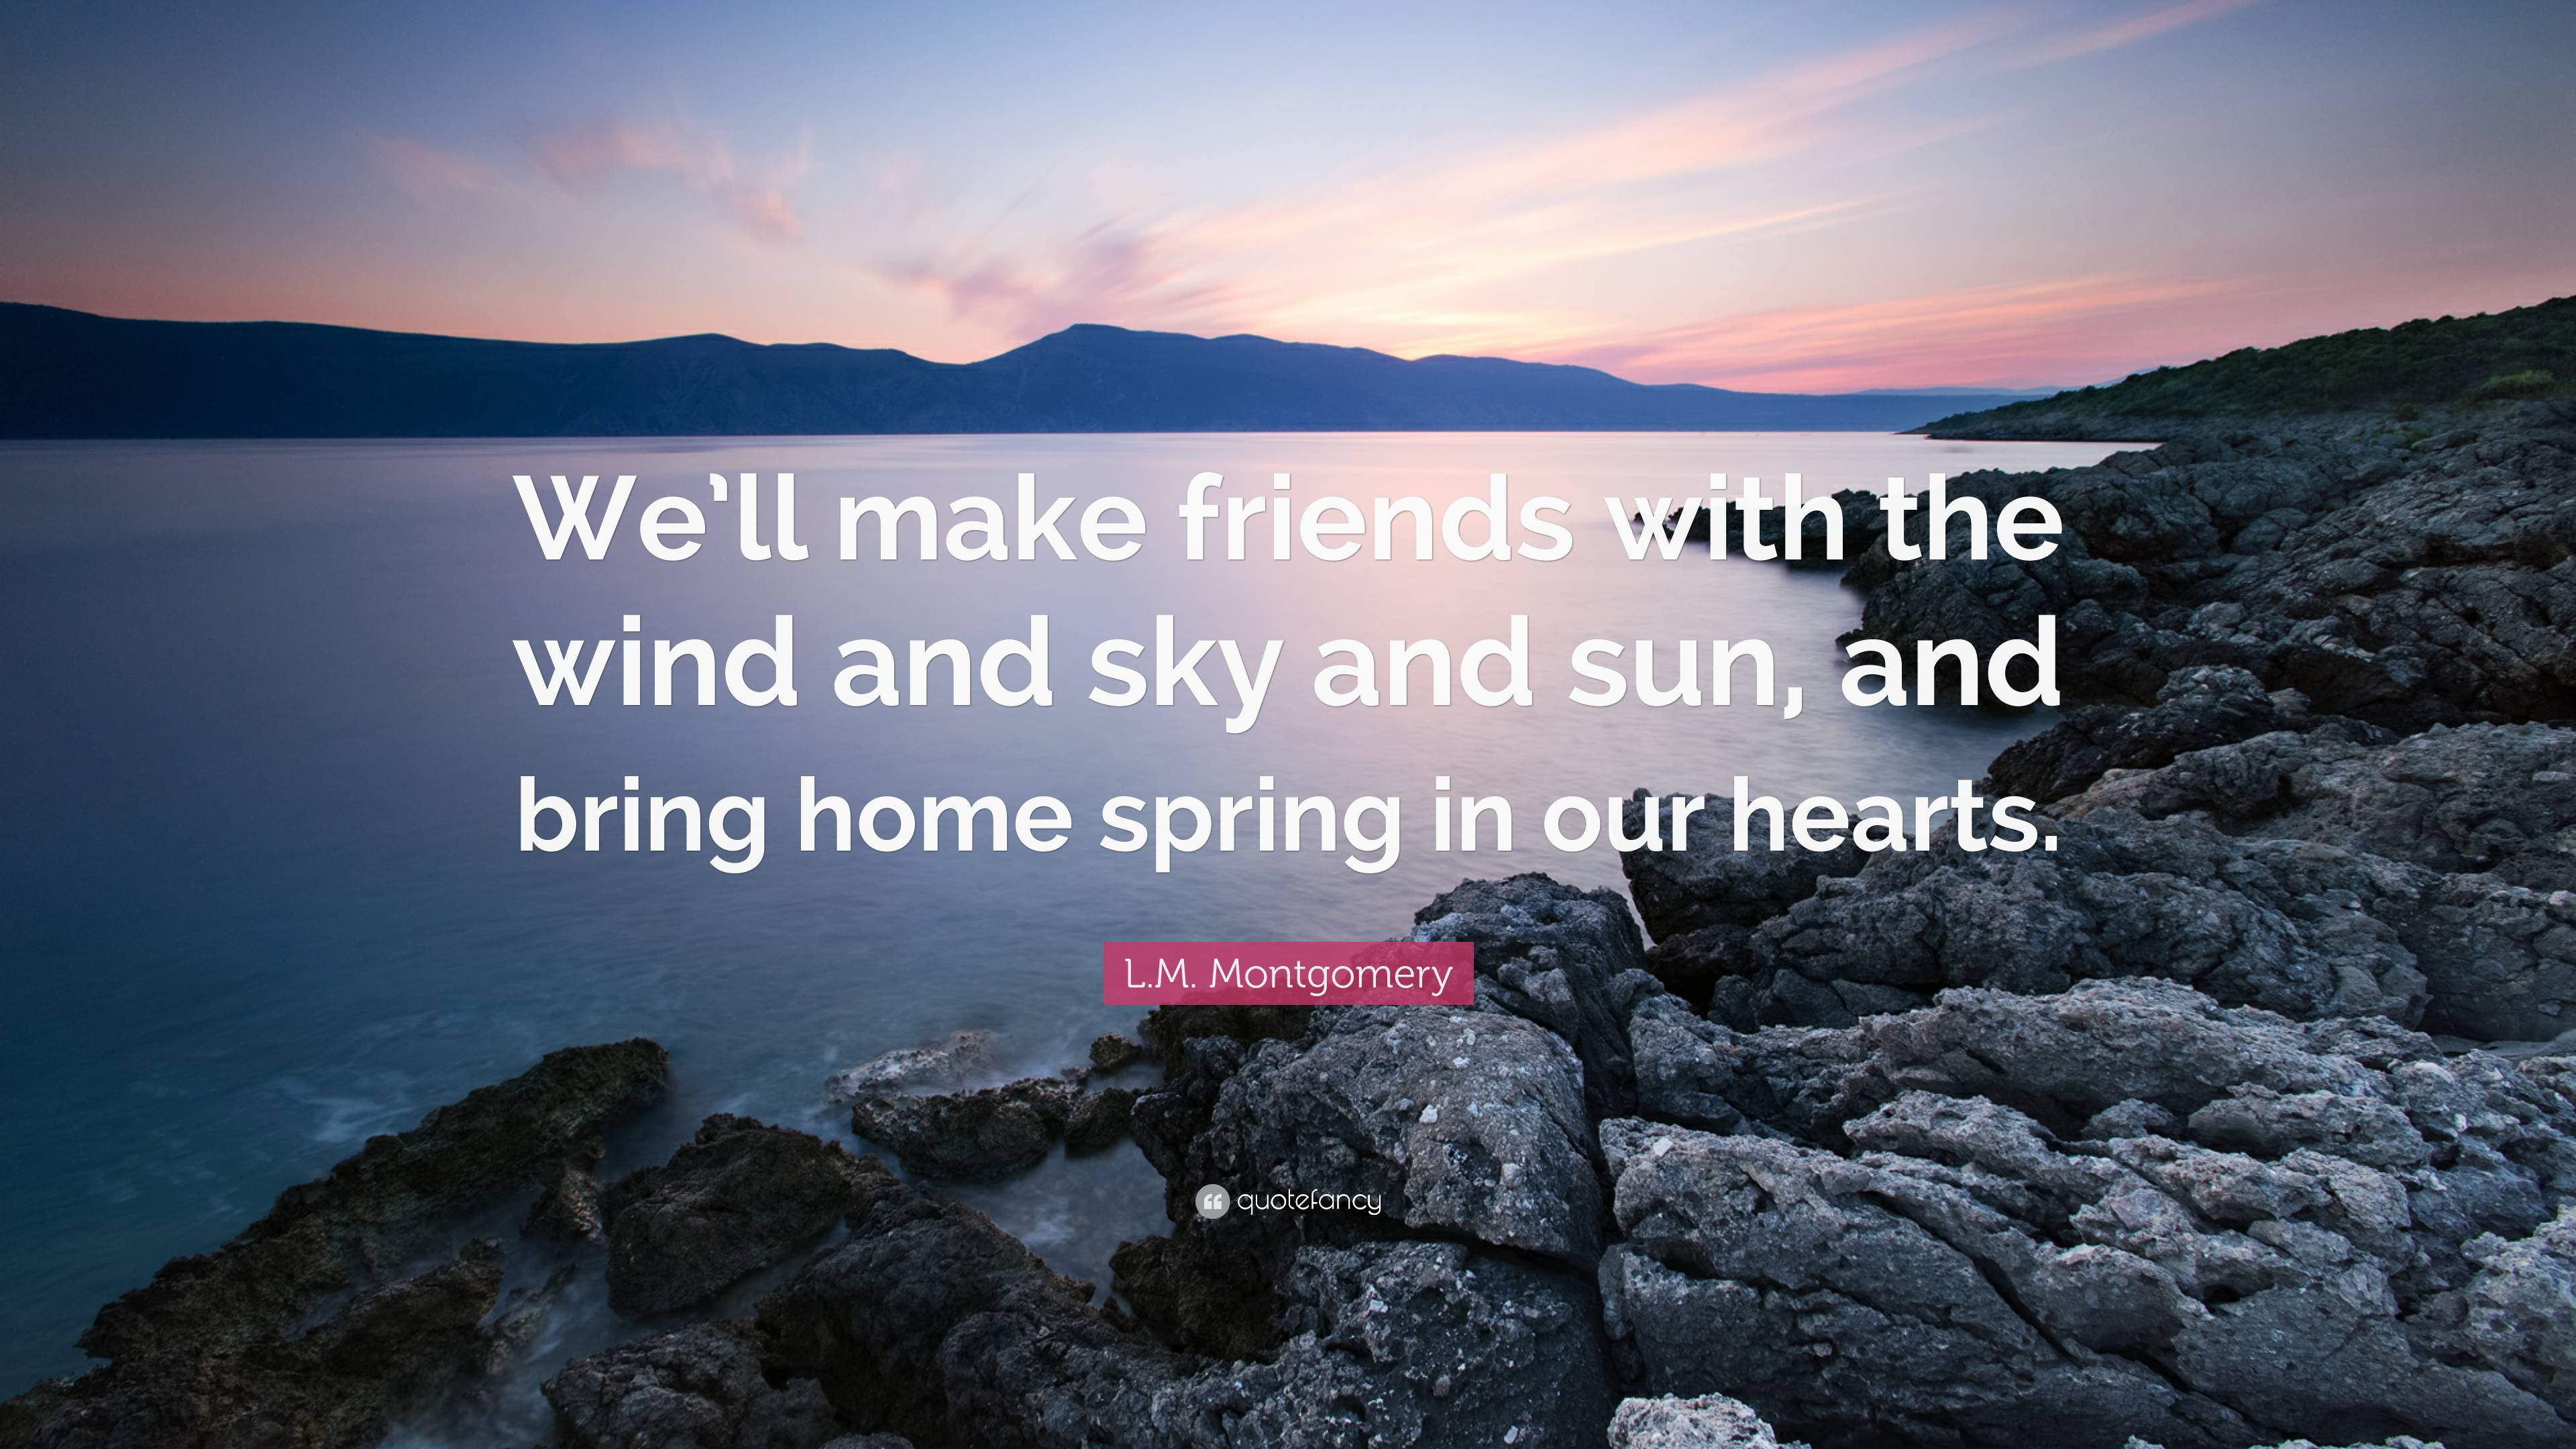 L.M. Montgomery Quote: “We’ll make friends with the wind and sky and ...